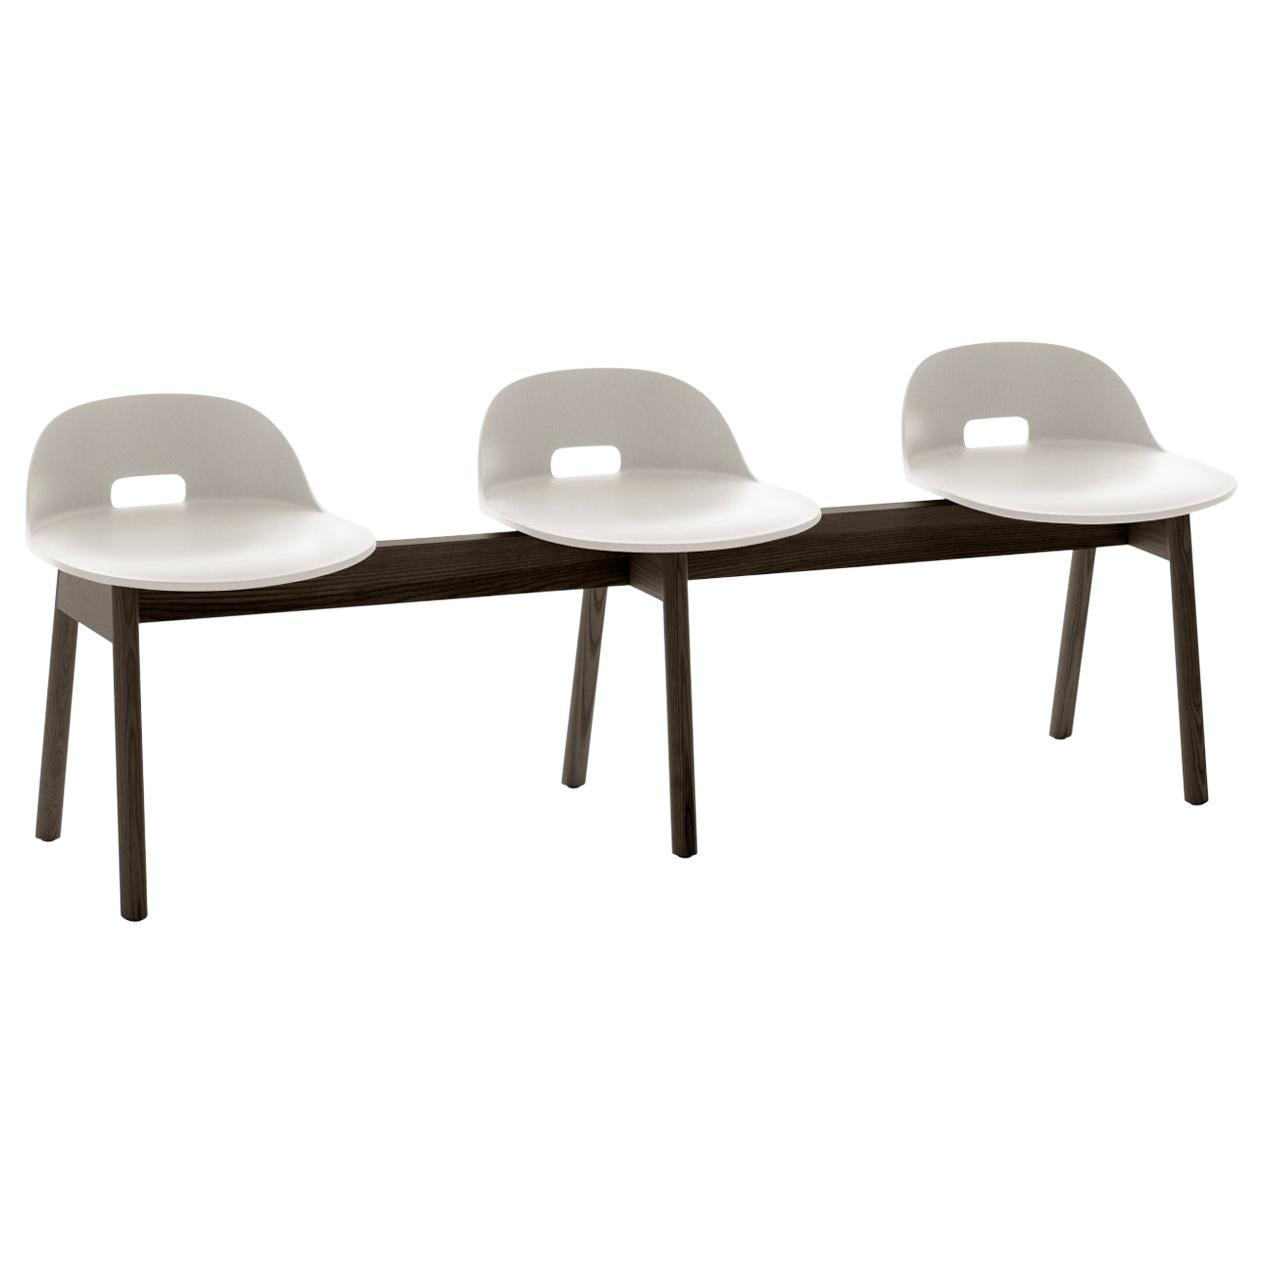 Emeco Alfi 3-Seat Bench in White and Dark Ash with Low Back by Jasper Morrison